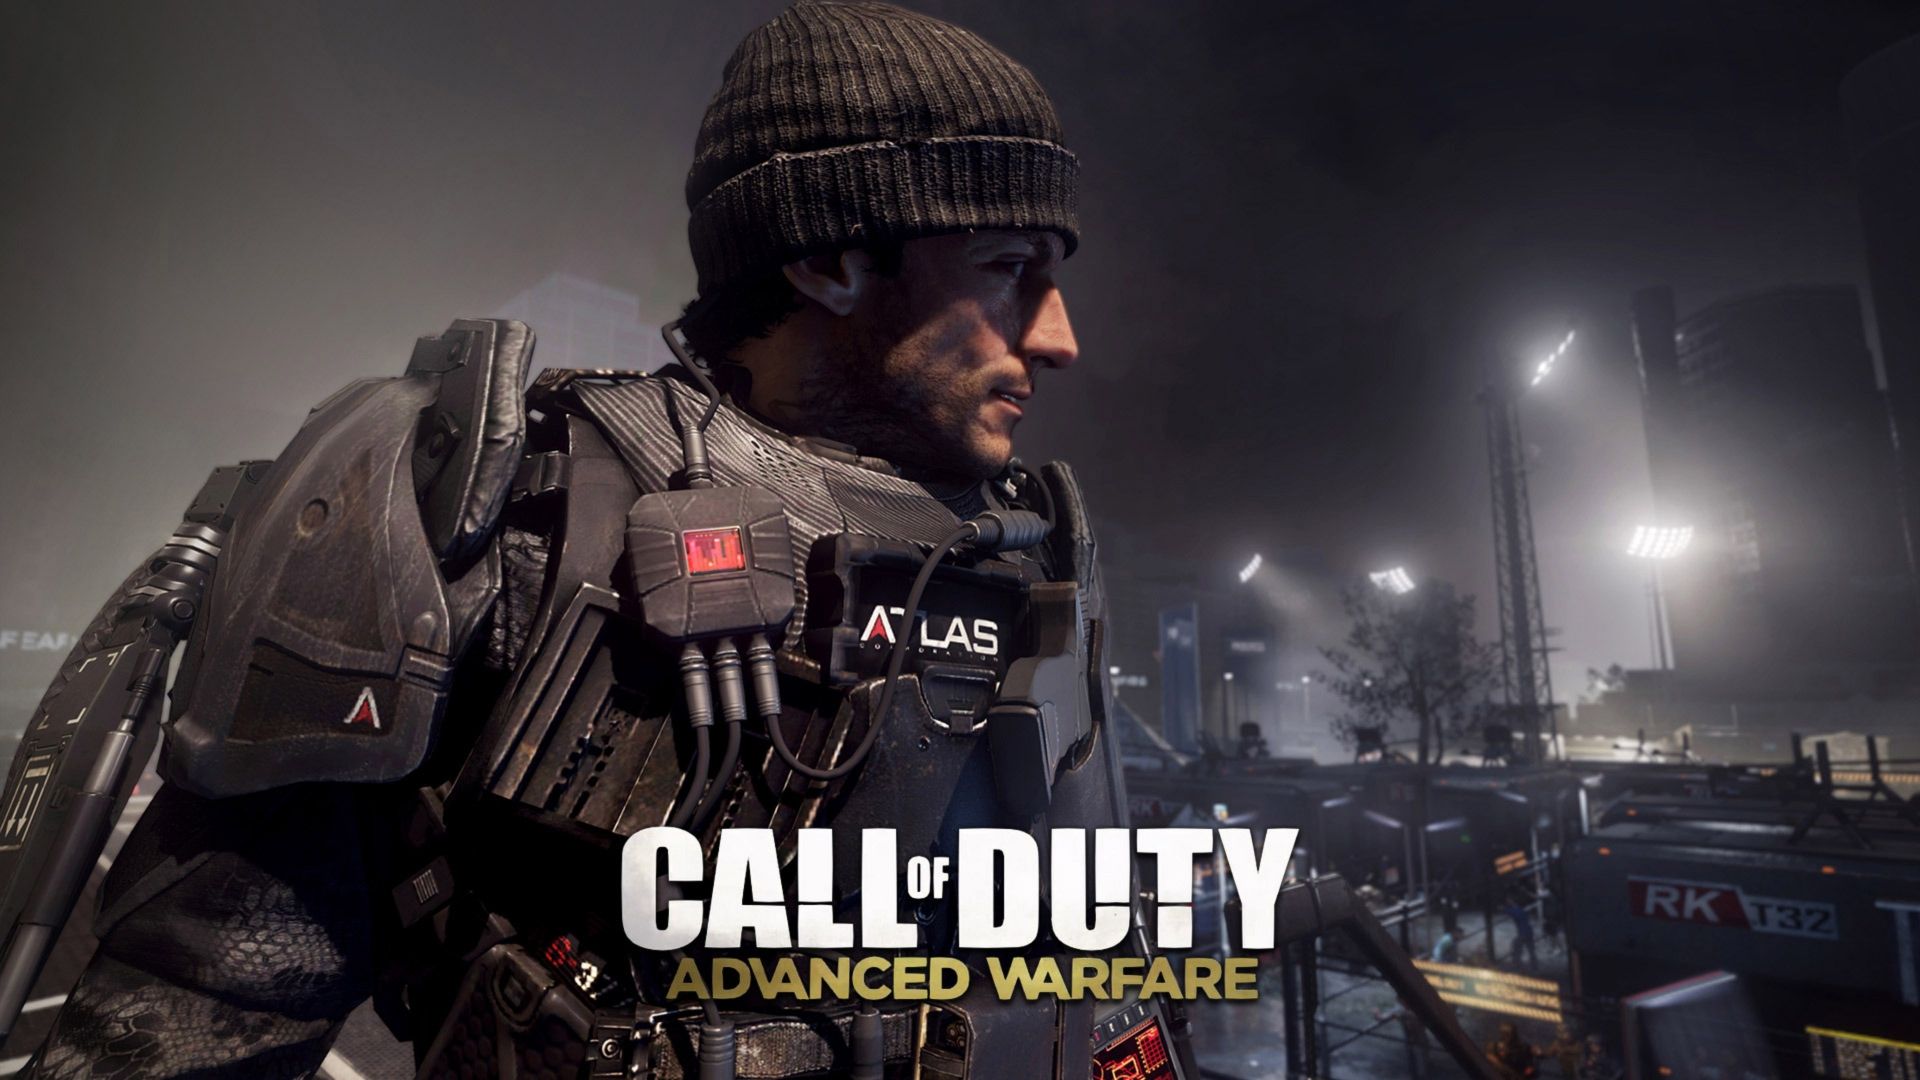 Free download Call Of Duty Advanced Warfare PS4 Wallpaper PS4 [3840x2160] for your Desktop, Mobile & Tablet. Explore Call Of Duty 4 Wallpaper. Modern Warfare Wallpaper, Call of Duty HD Wallpaper